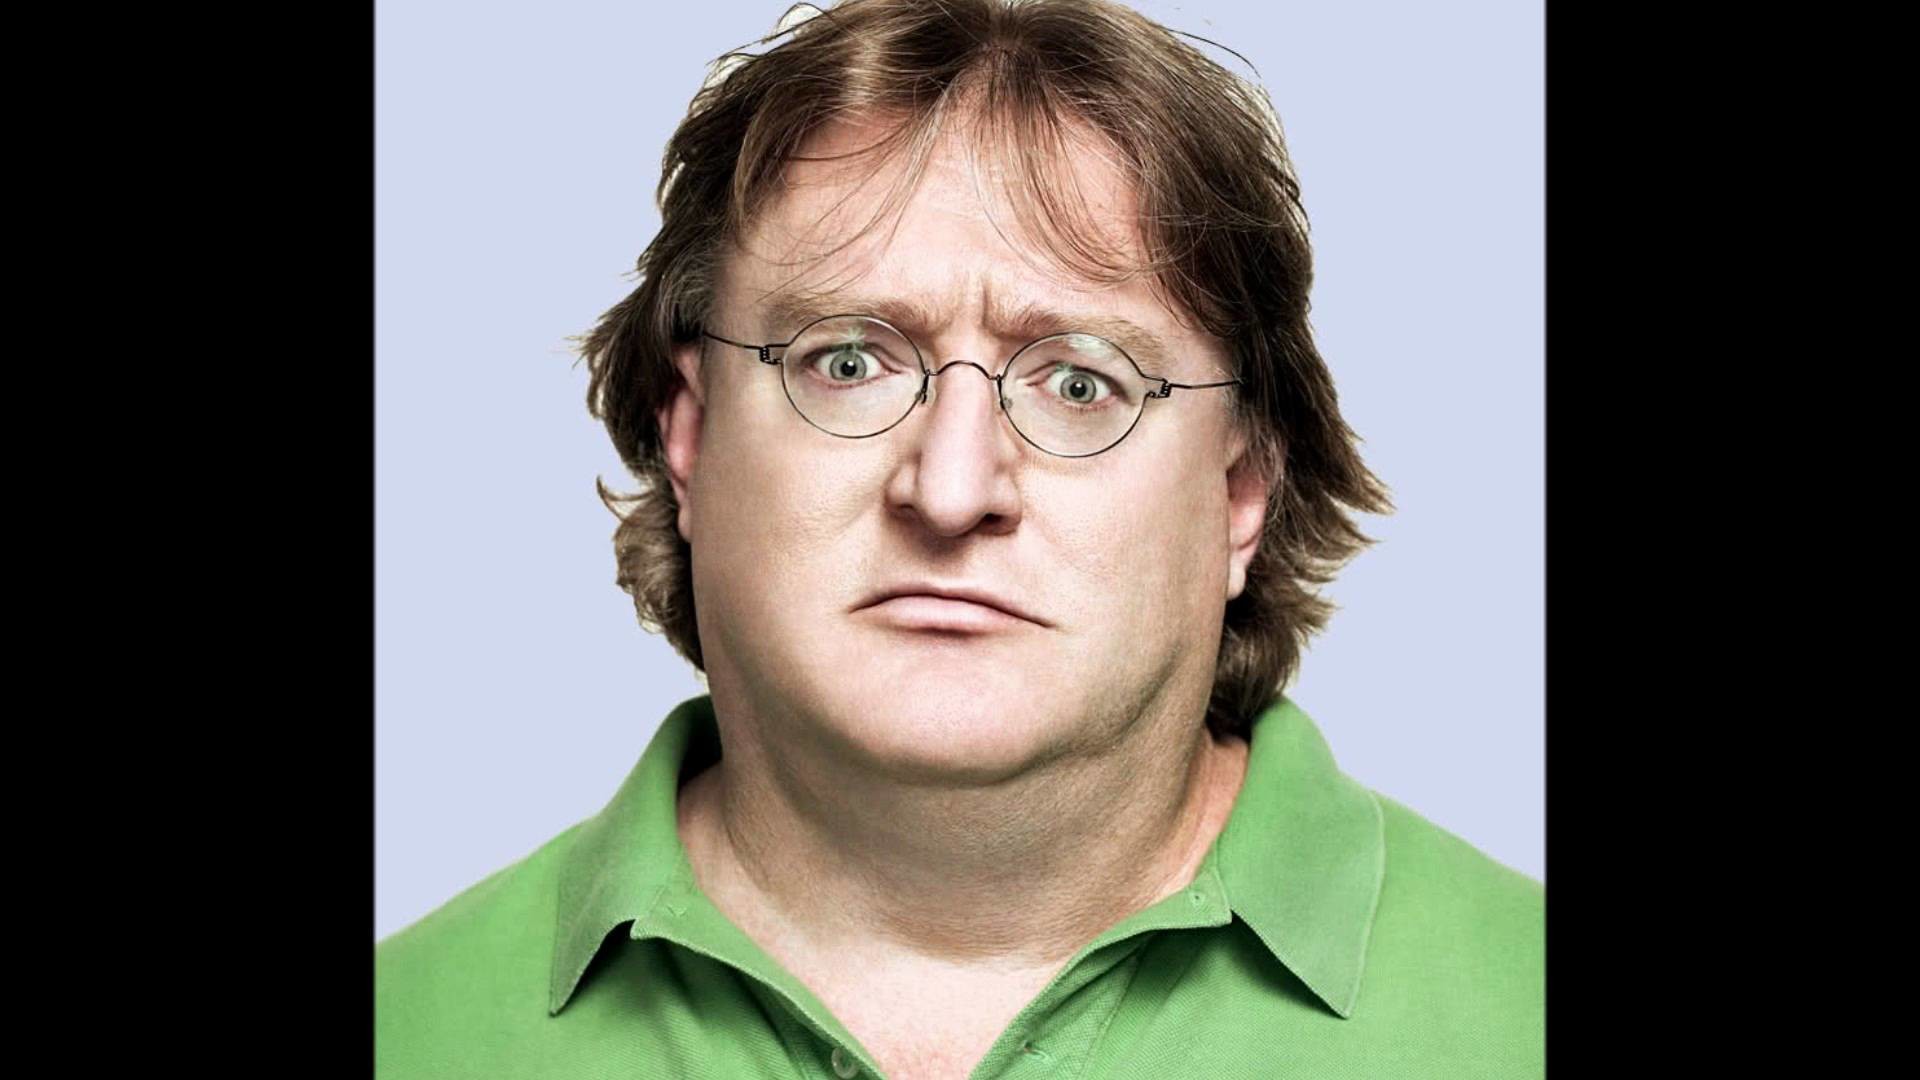 Gabe Newell Wallpapers